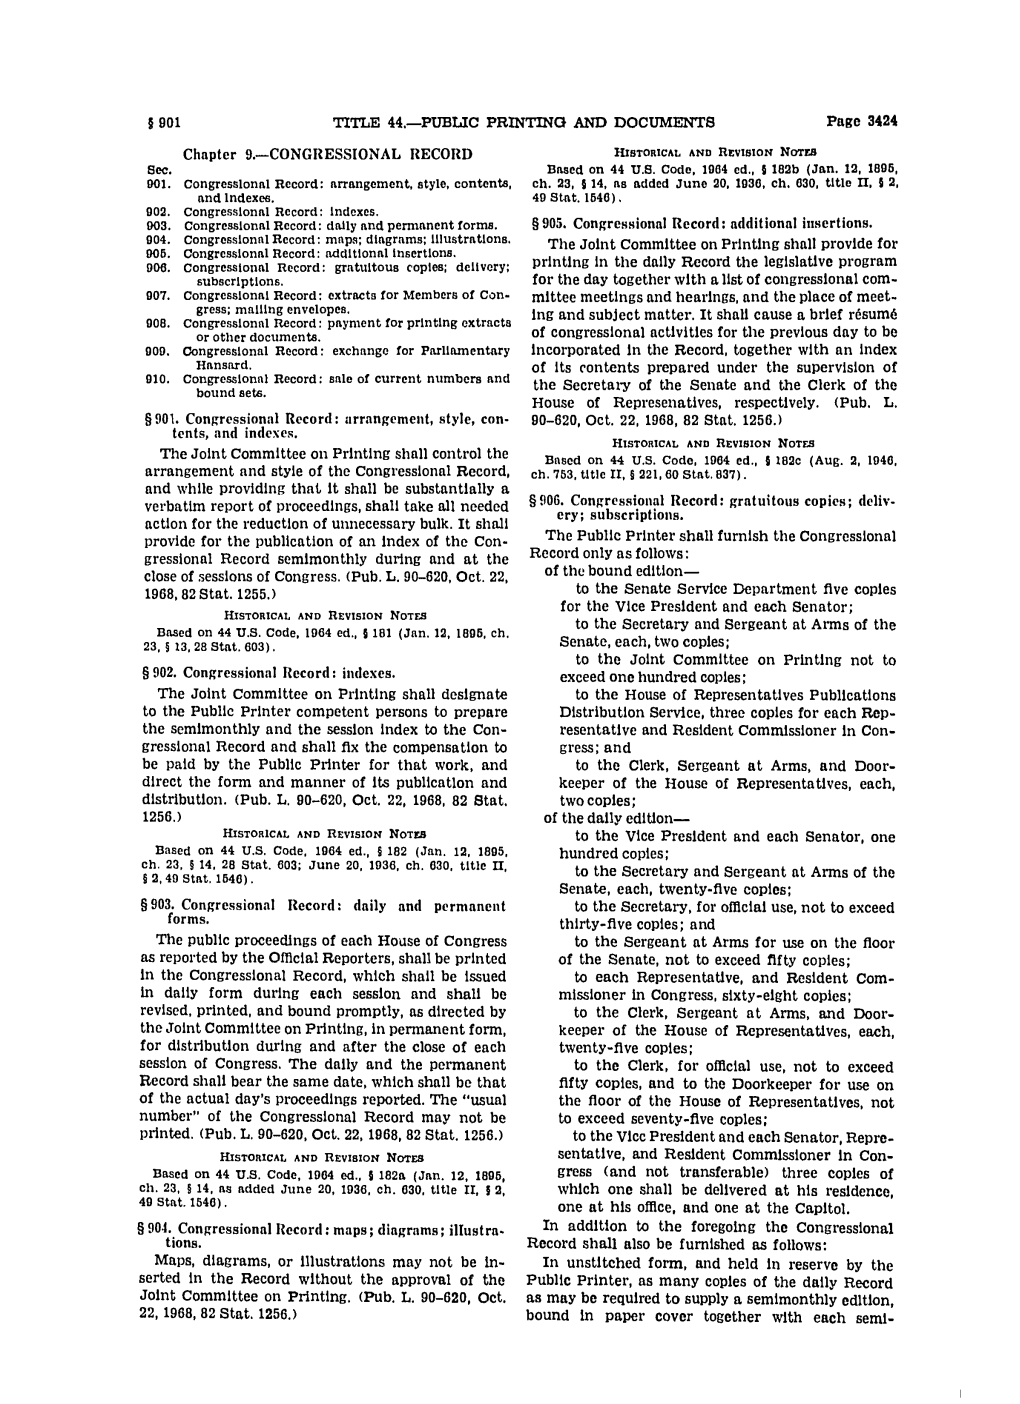 United States Code: Congressional Record, 44 USC §§ 901-910